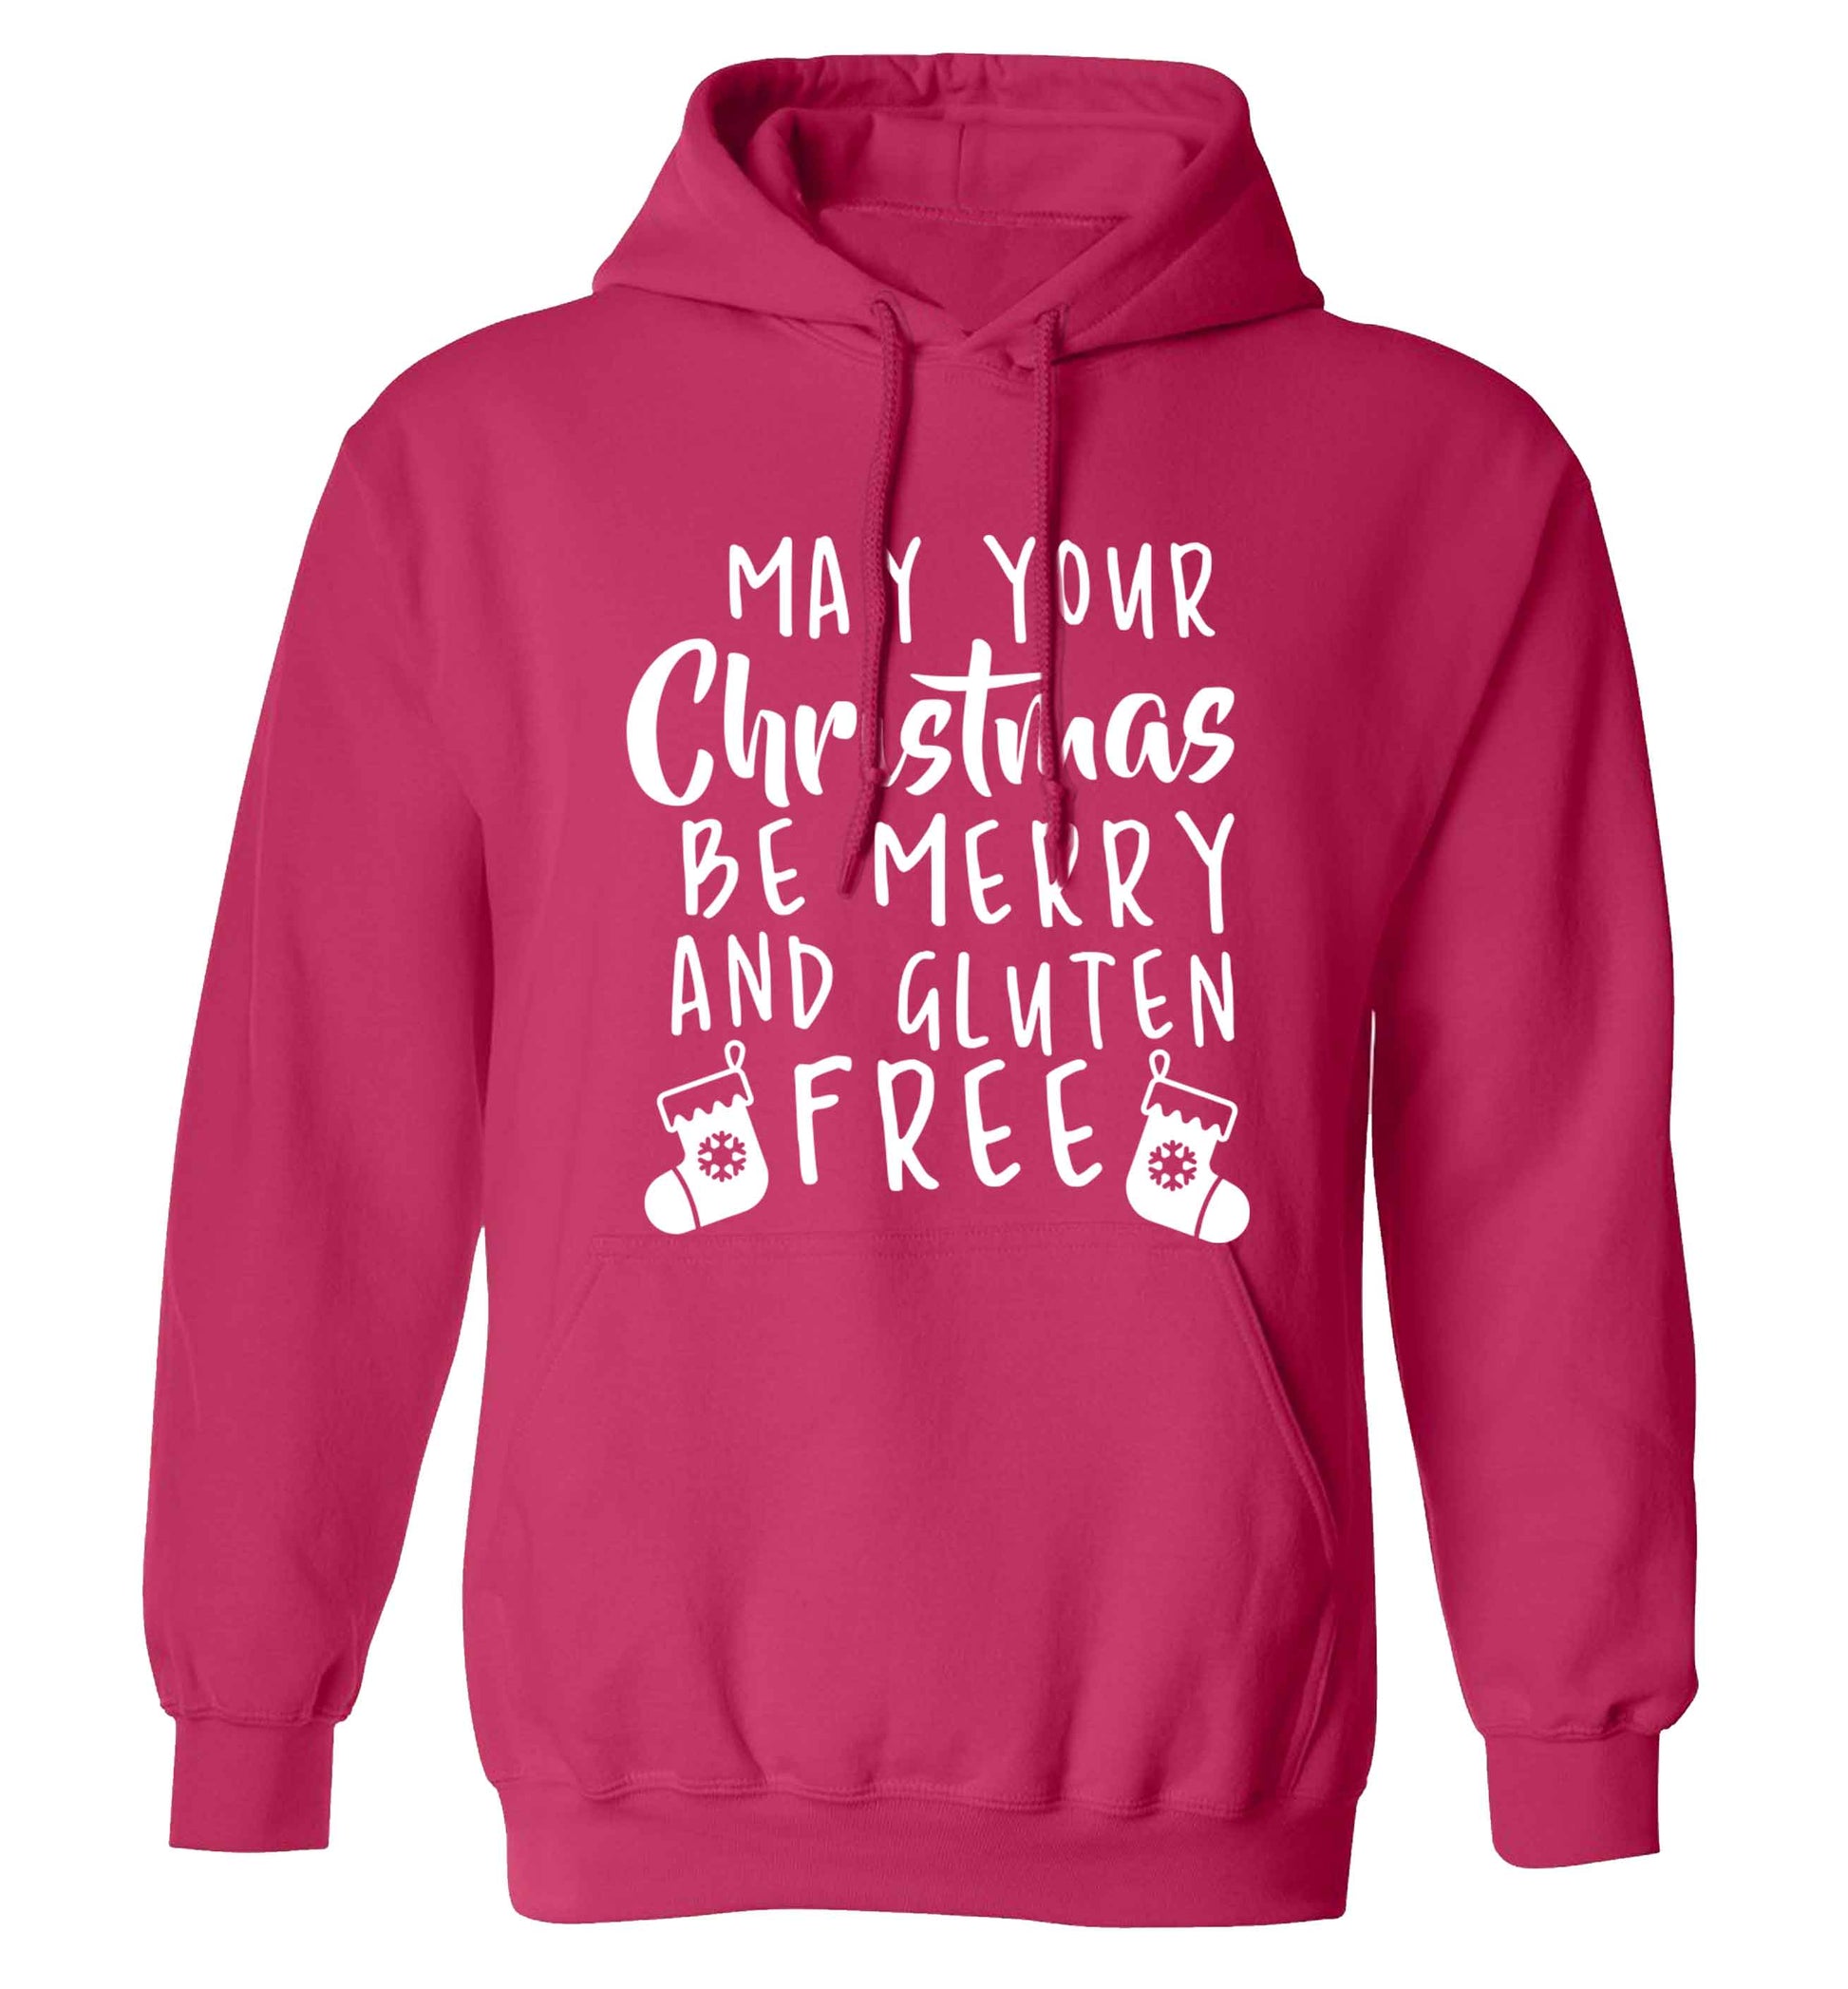 May your Christmas be merry and gluten free adults unisex pink hoodie 2XL